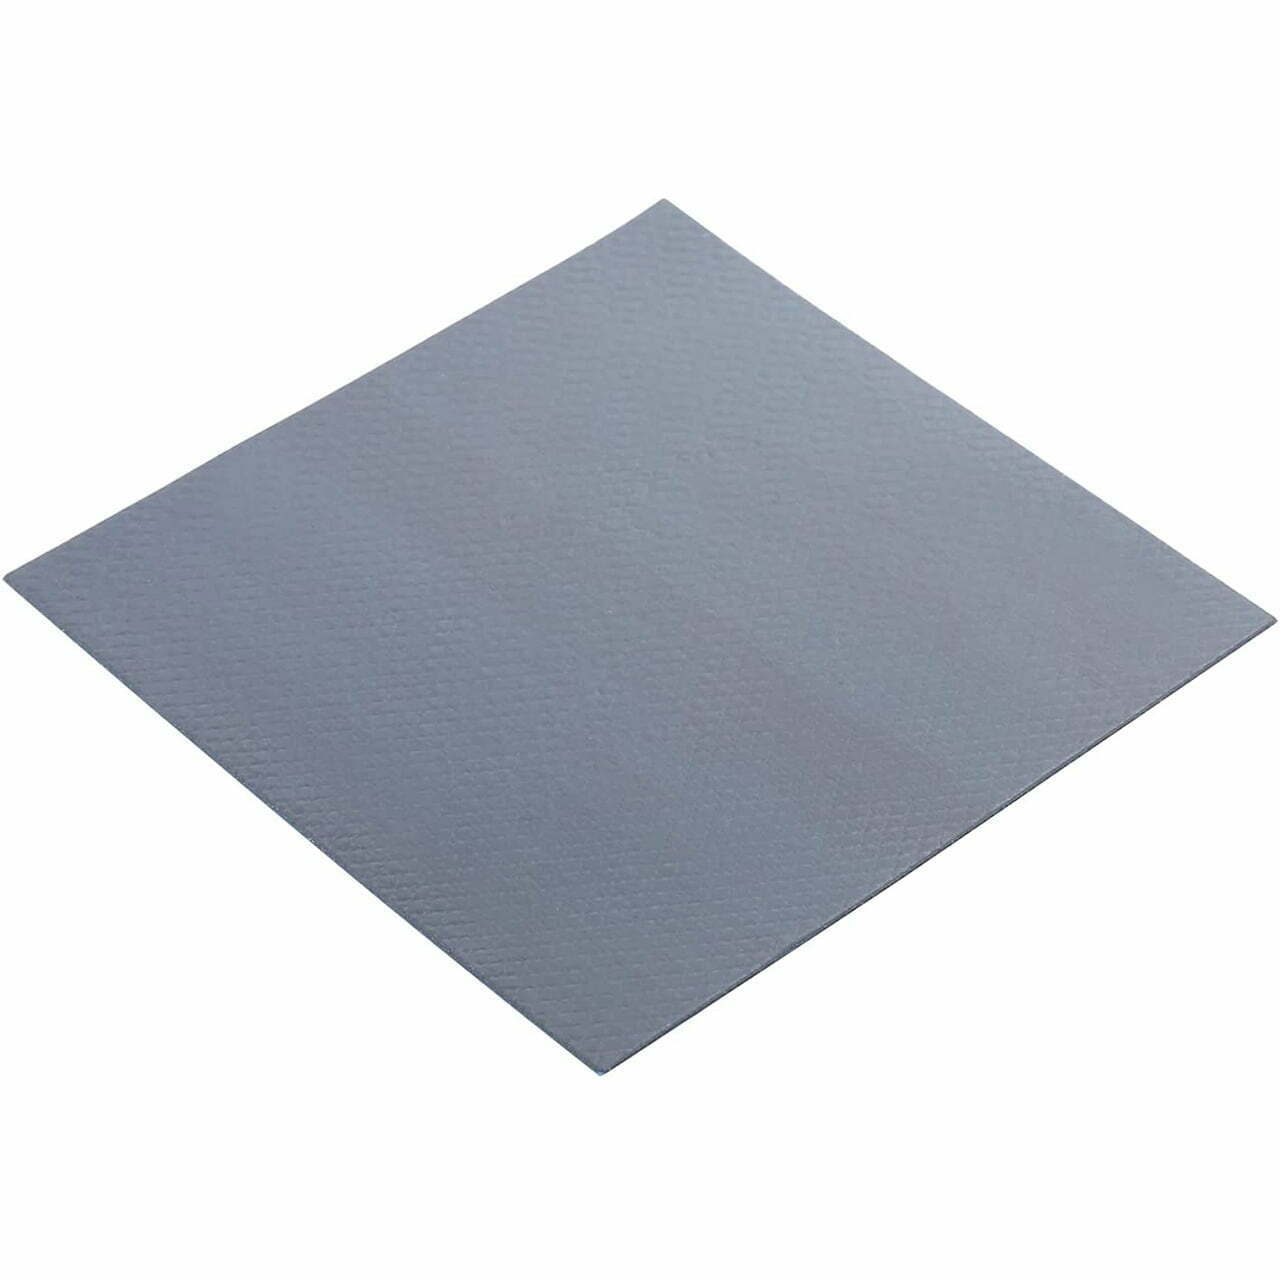 Buy Gelid Solutions GP-EXTREME 120×20 Thermal Pads For Laptop